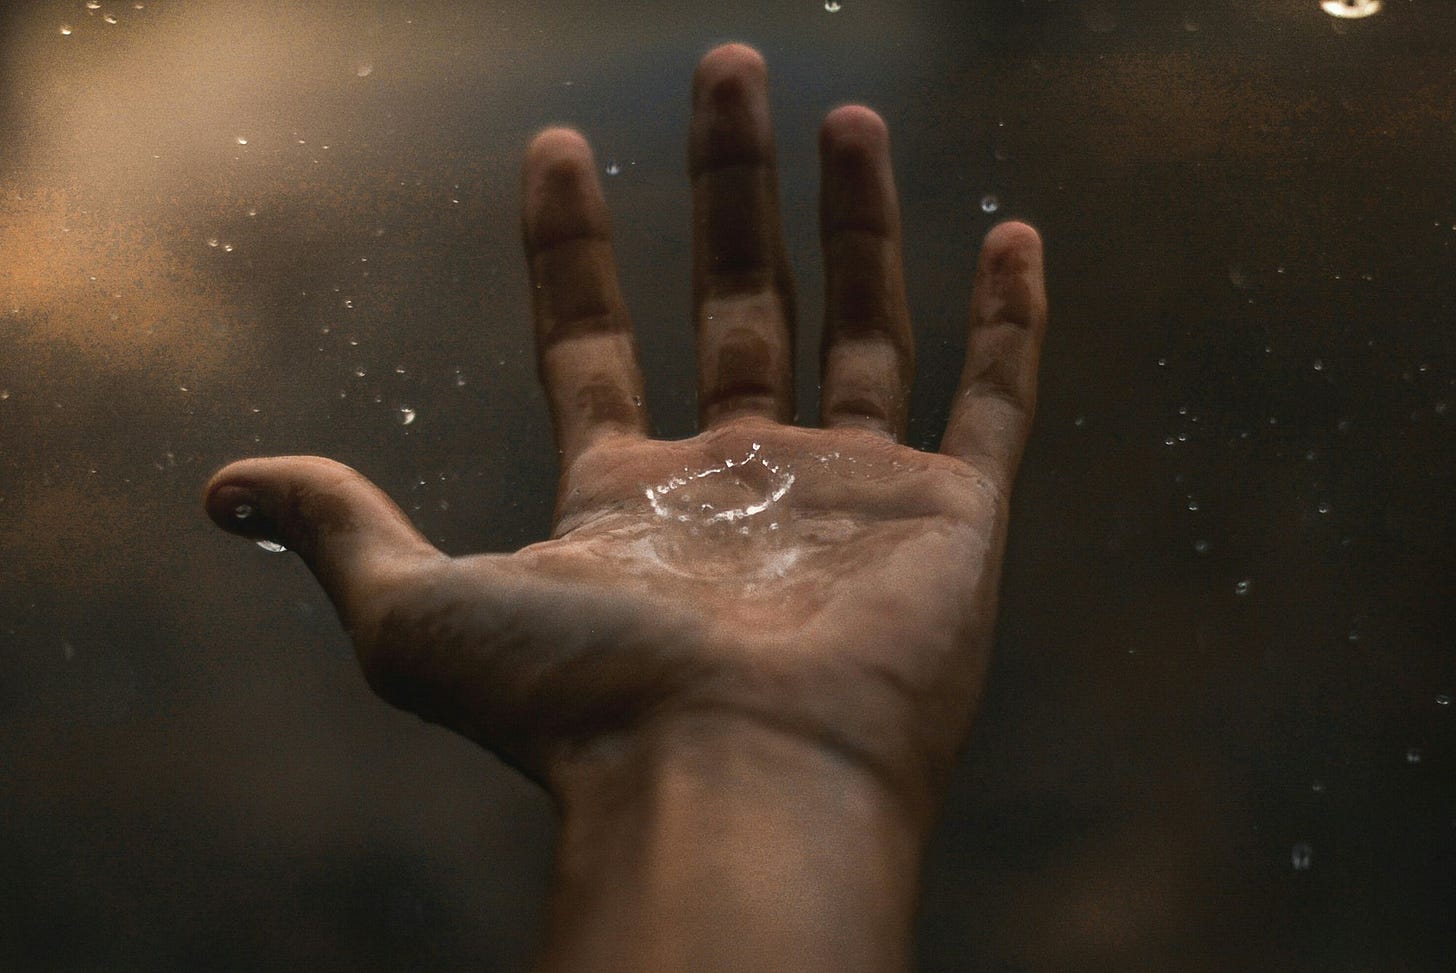 Photo of water droplet in dirty hand by Fabiano  Rodrigues via Pexels